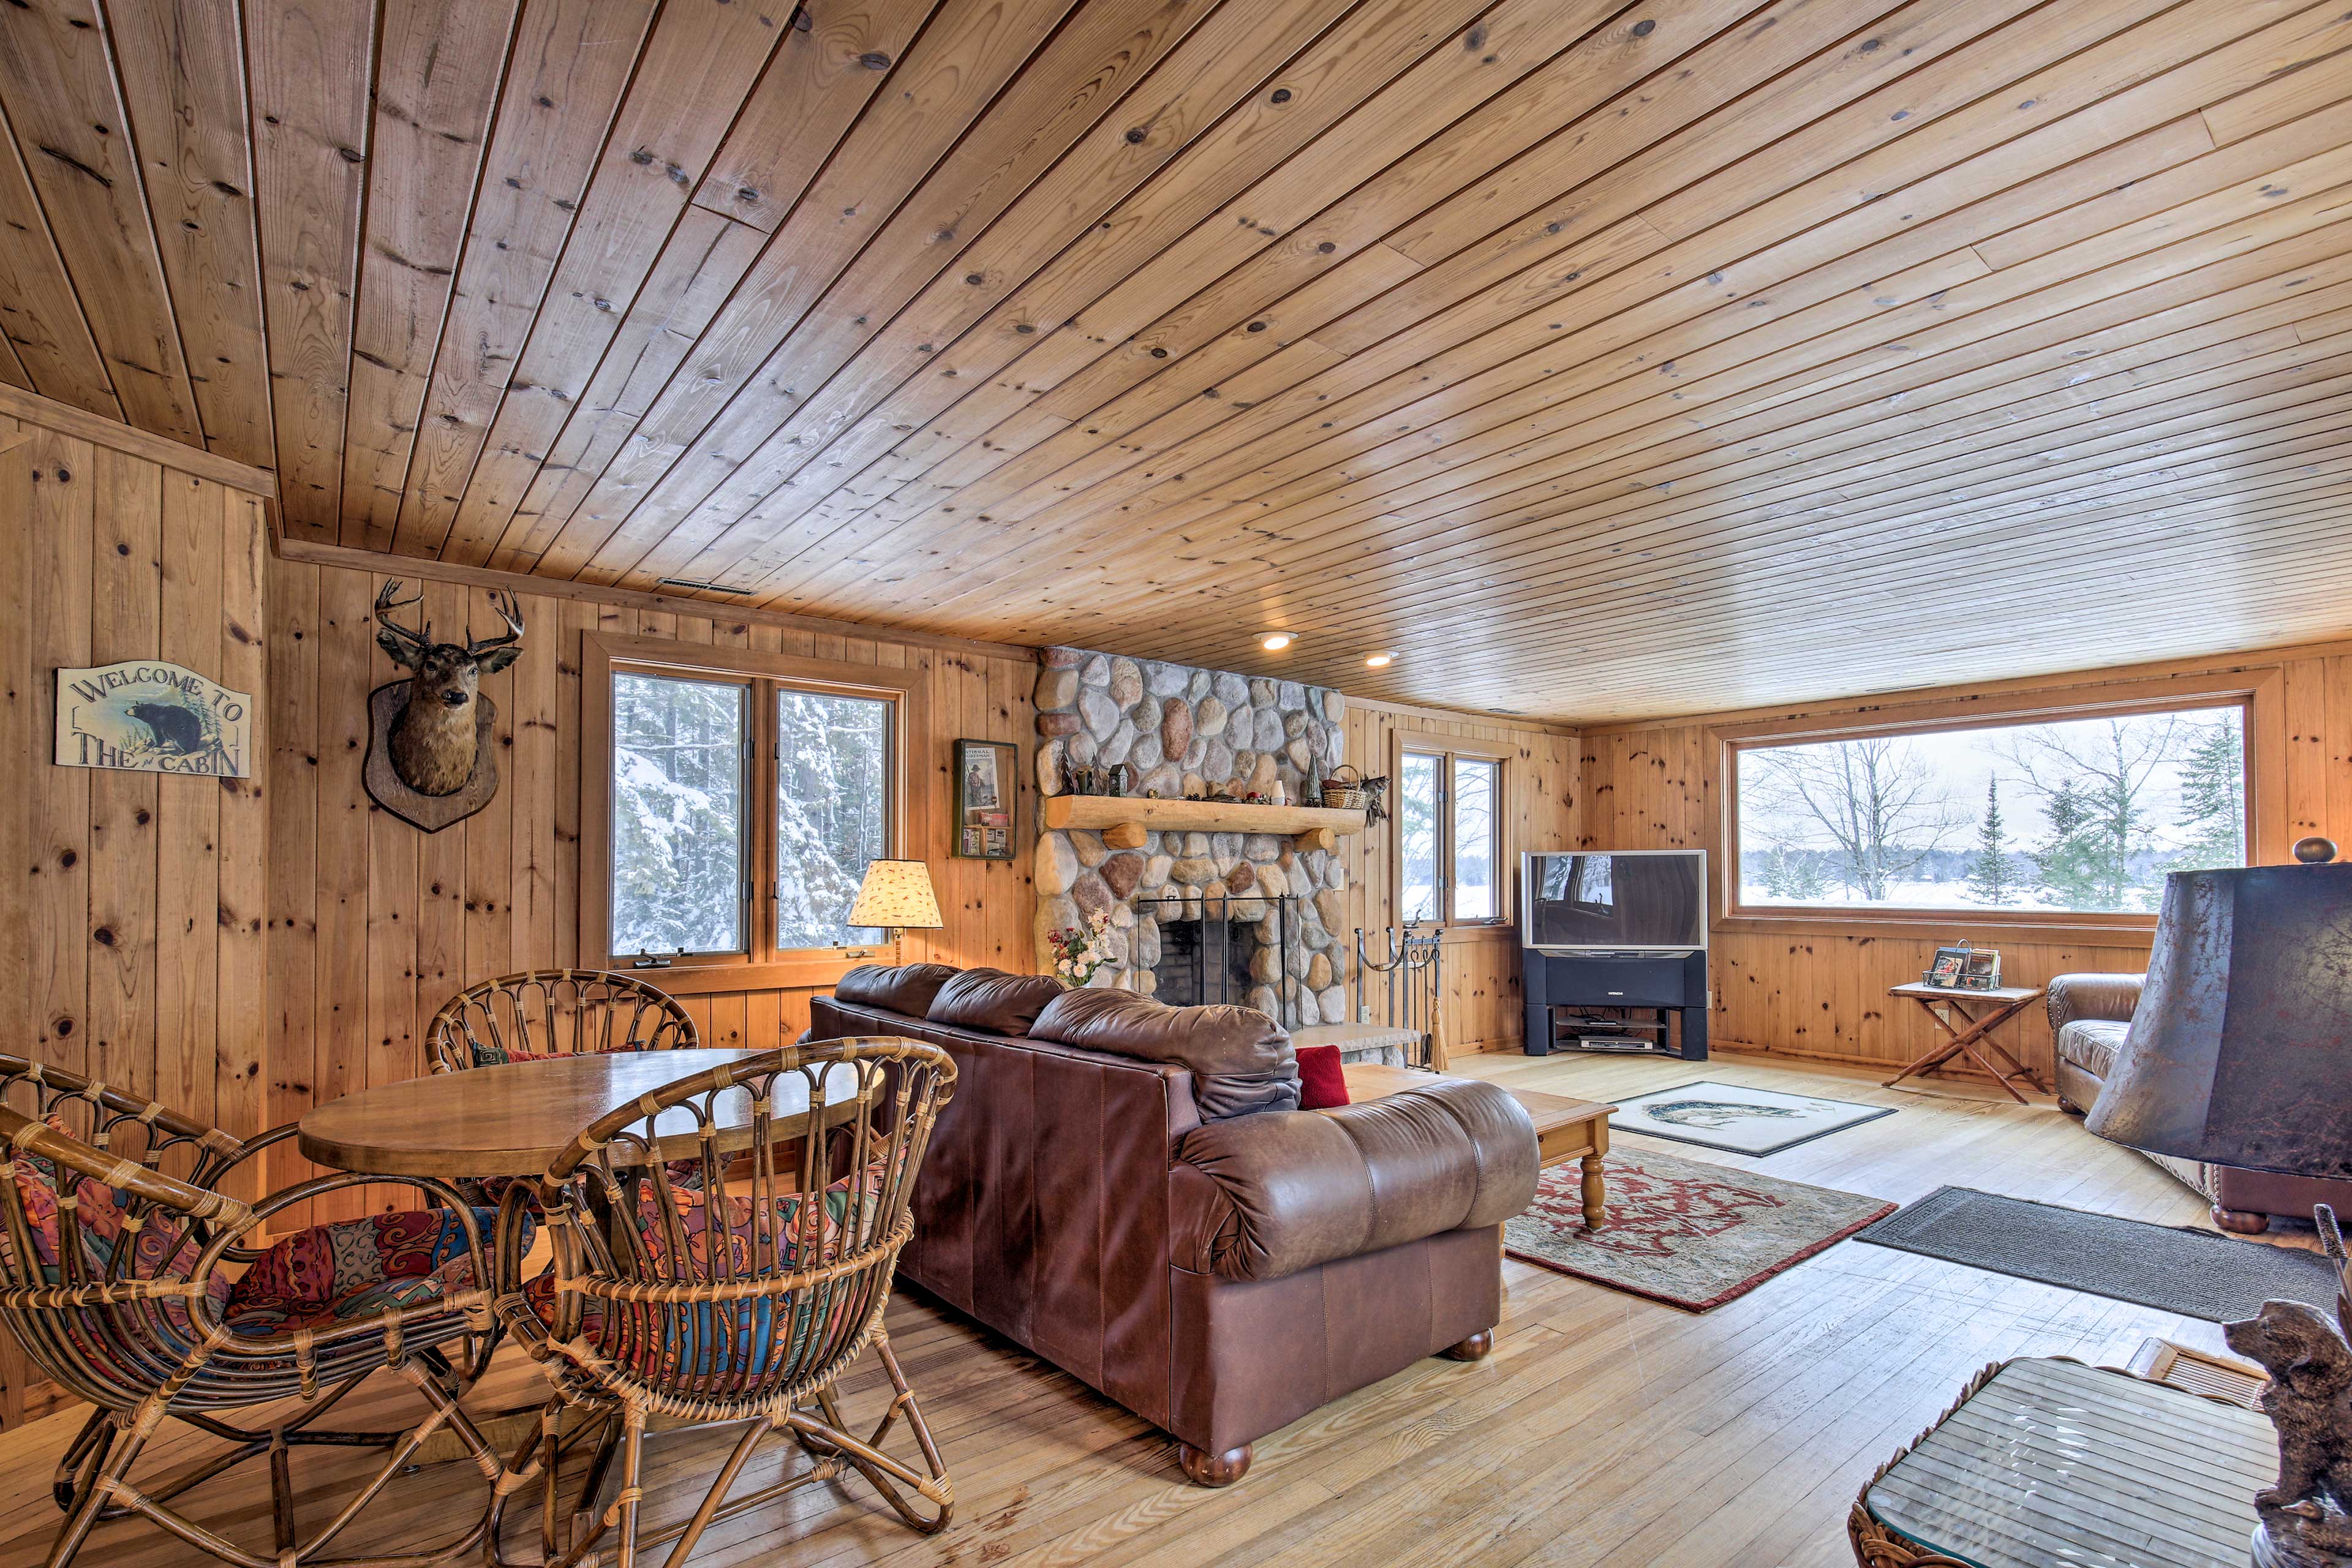 Come visit this 3-bedroom, 1-bathroom cabin on Pike Lake.